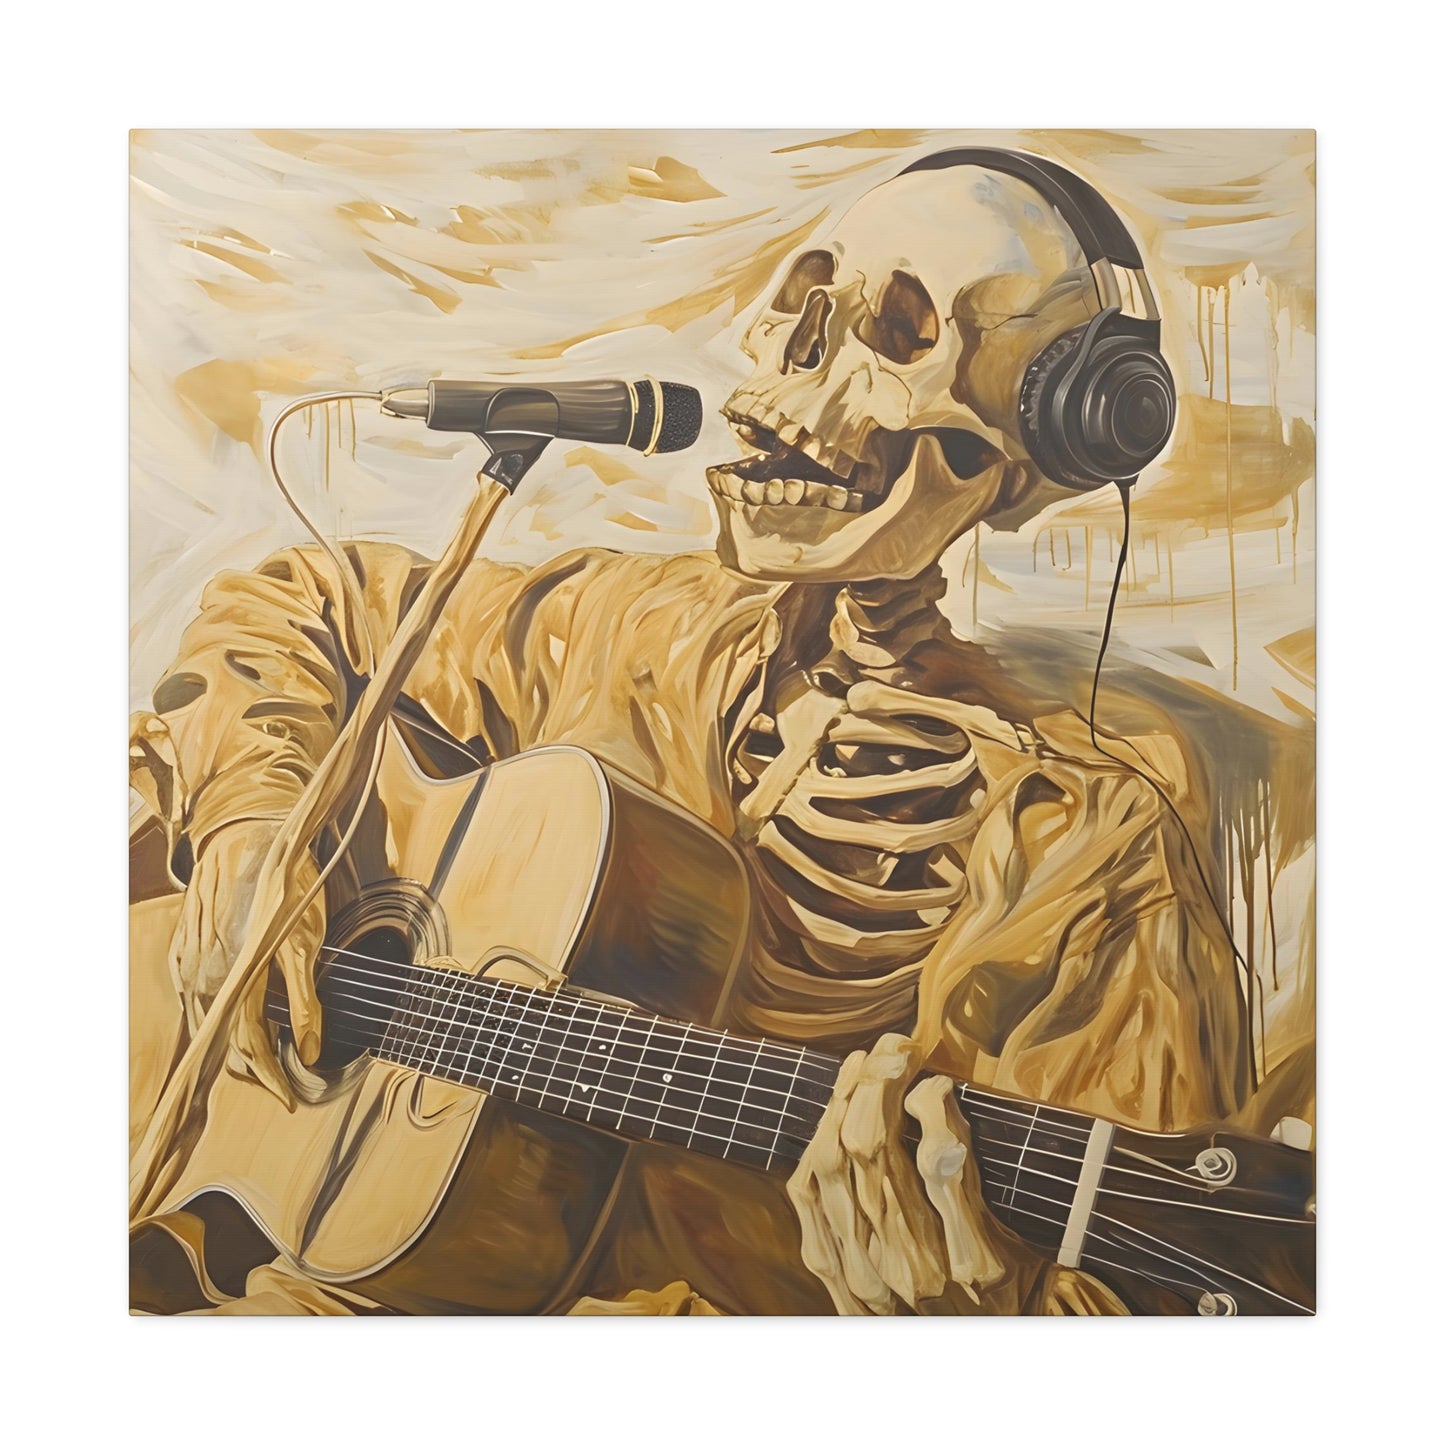 image 2 depicting a skeleton singing into a microphone, embodying music's redemptive power, inspired by 'American Pie' lyrics, with golden tones symbolizing music's sanctity